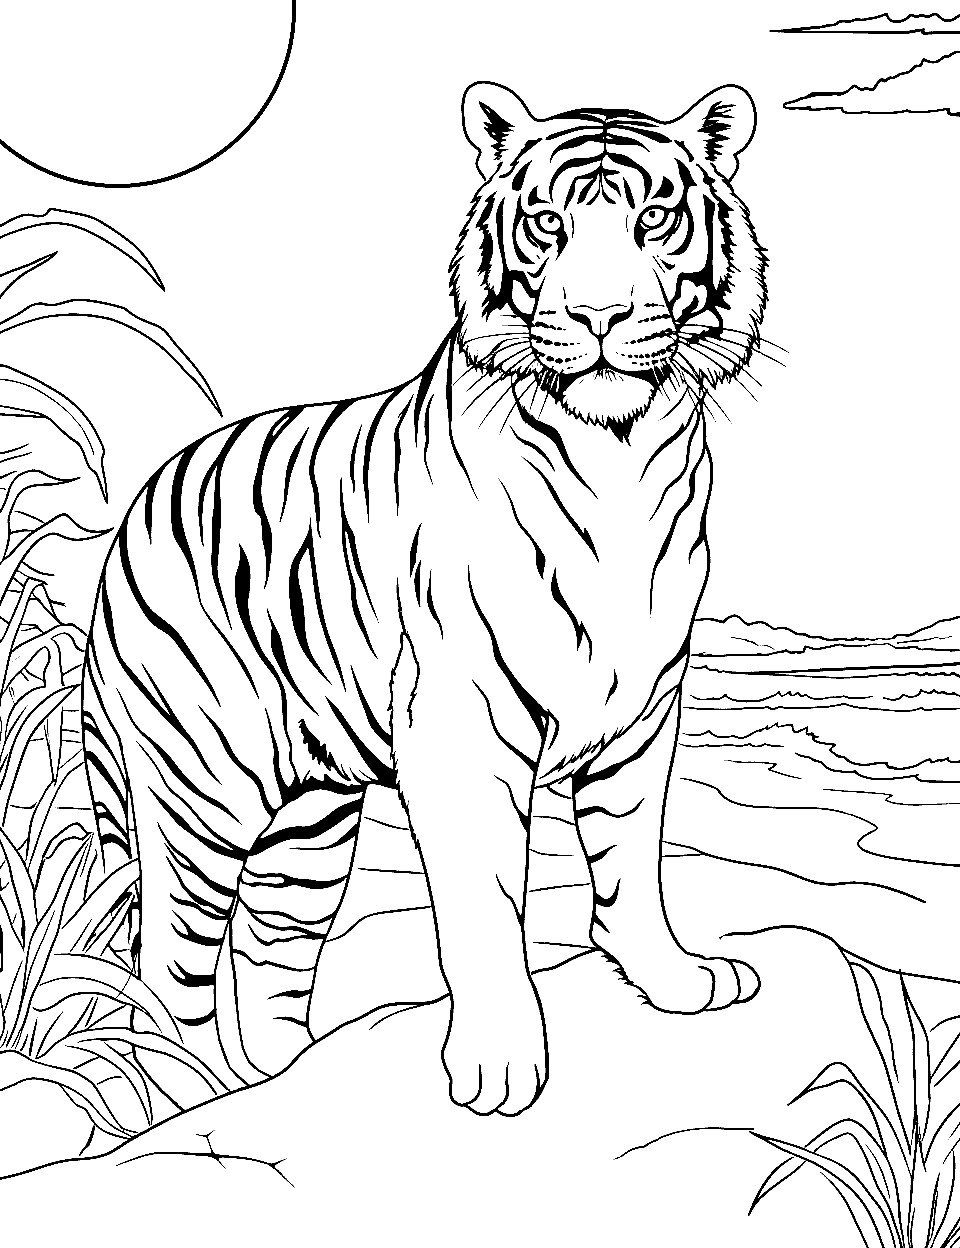 Beachside Bliss Tiger Coloring Page - A tiger enjoying itself on a sunny beach.